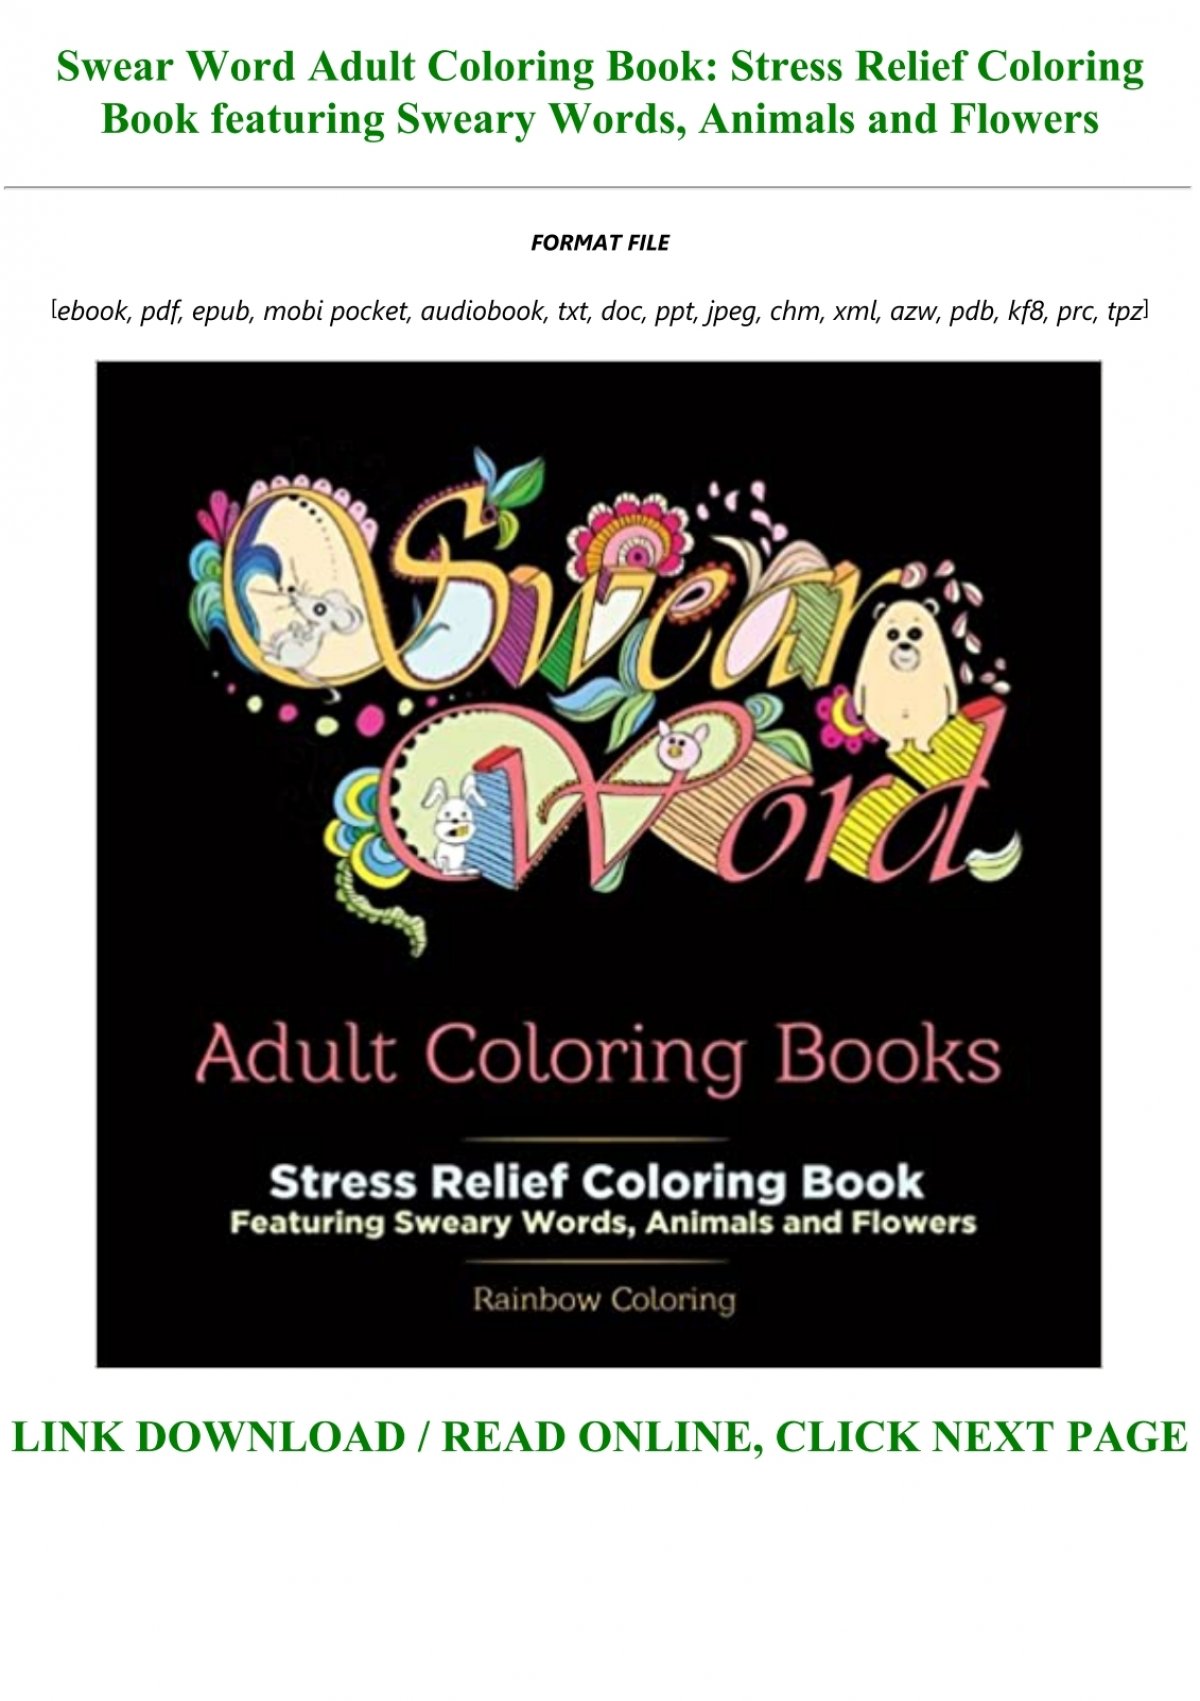 Download Free Download Swear Word Adult Coloring Book Stress Relief Coloring Book Featuring Sweary Words Animals And Flowers Full Online